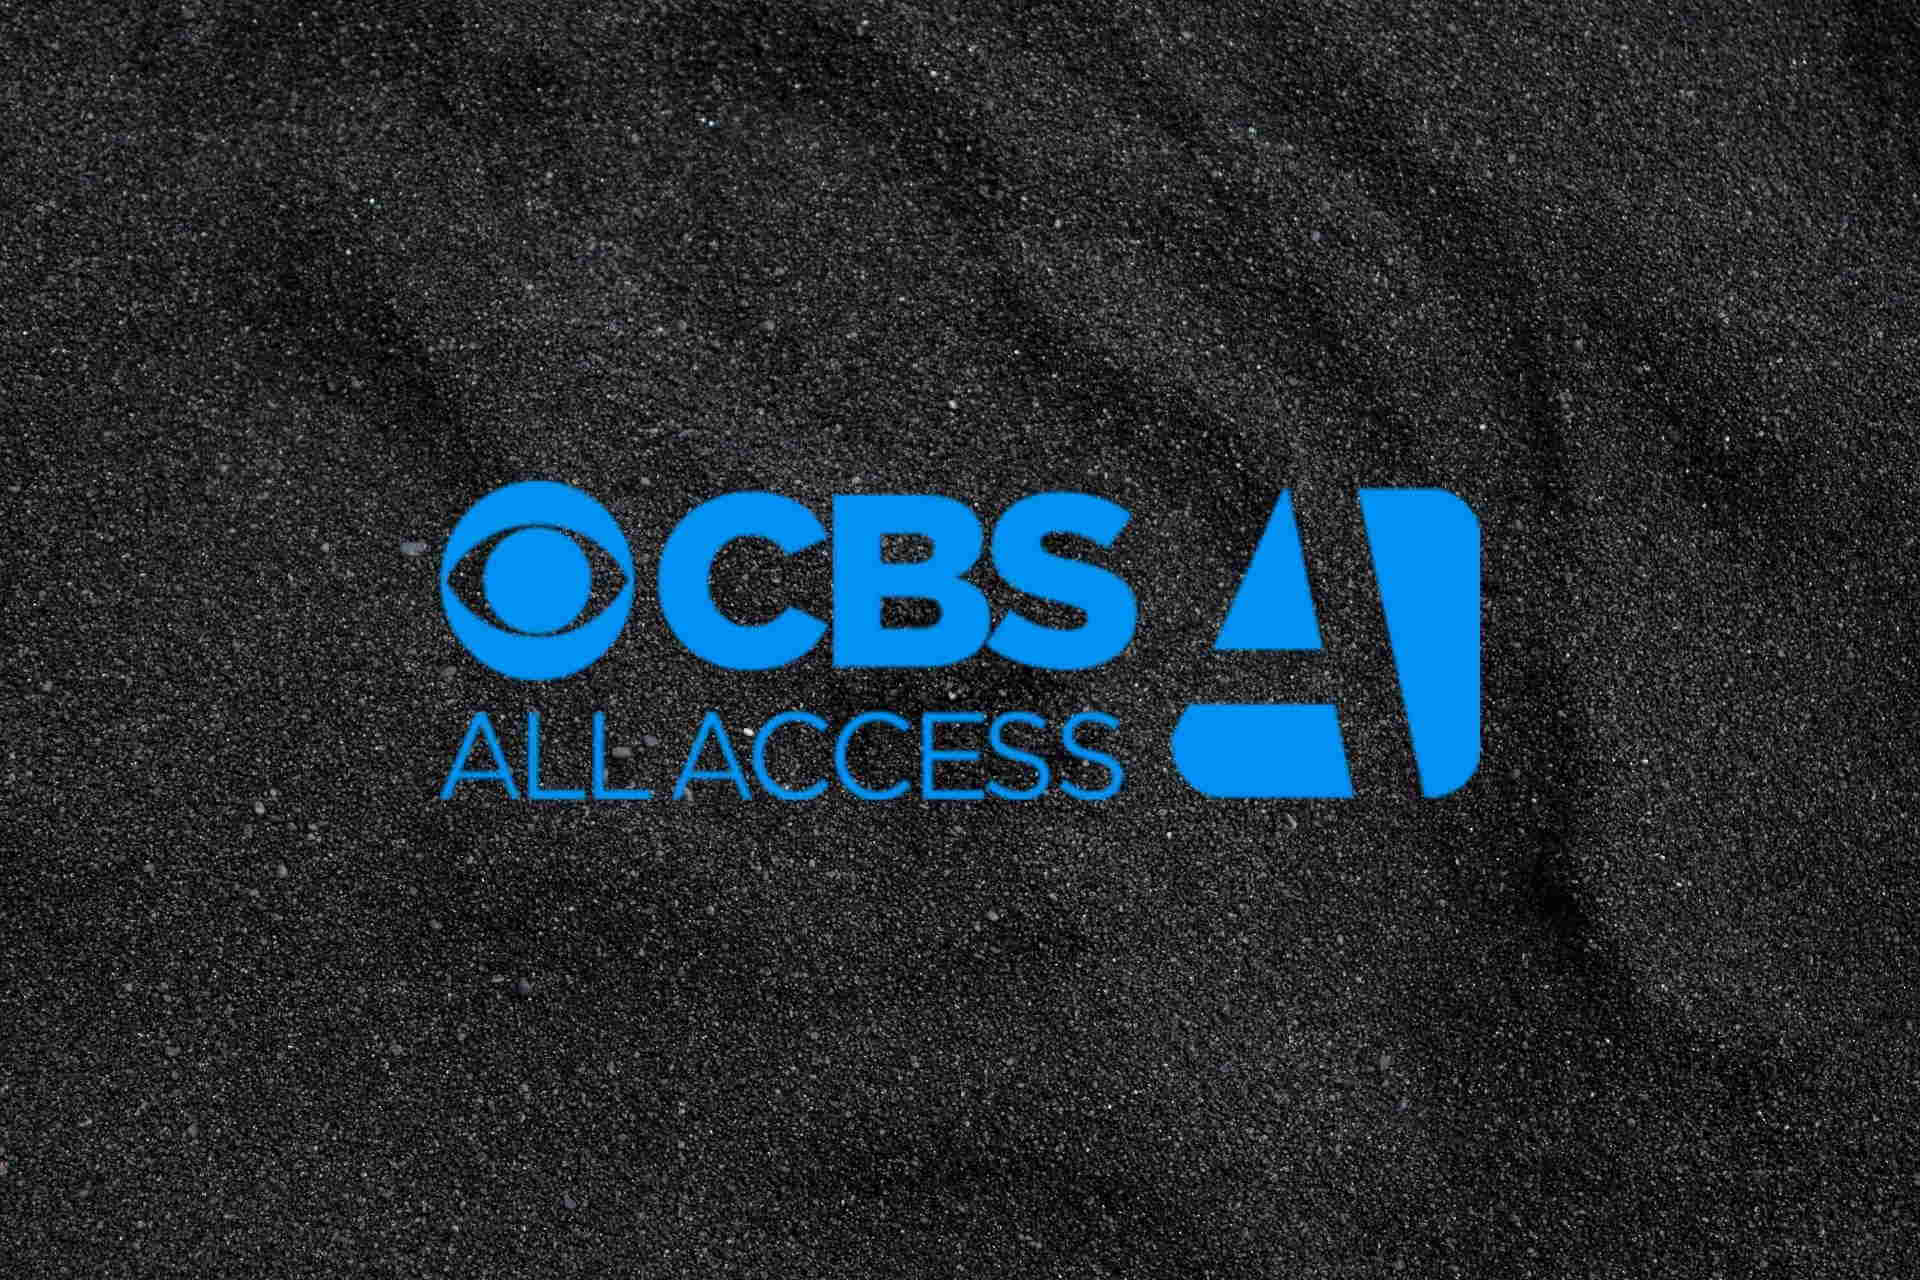 Streaming problems with CBS All Access